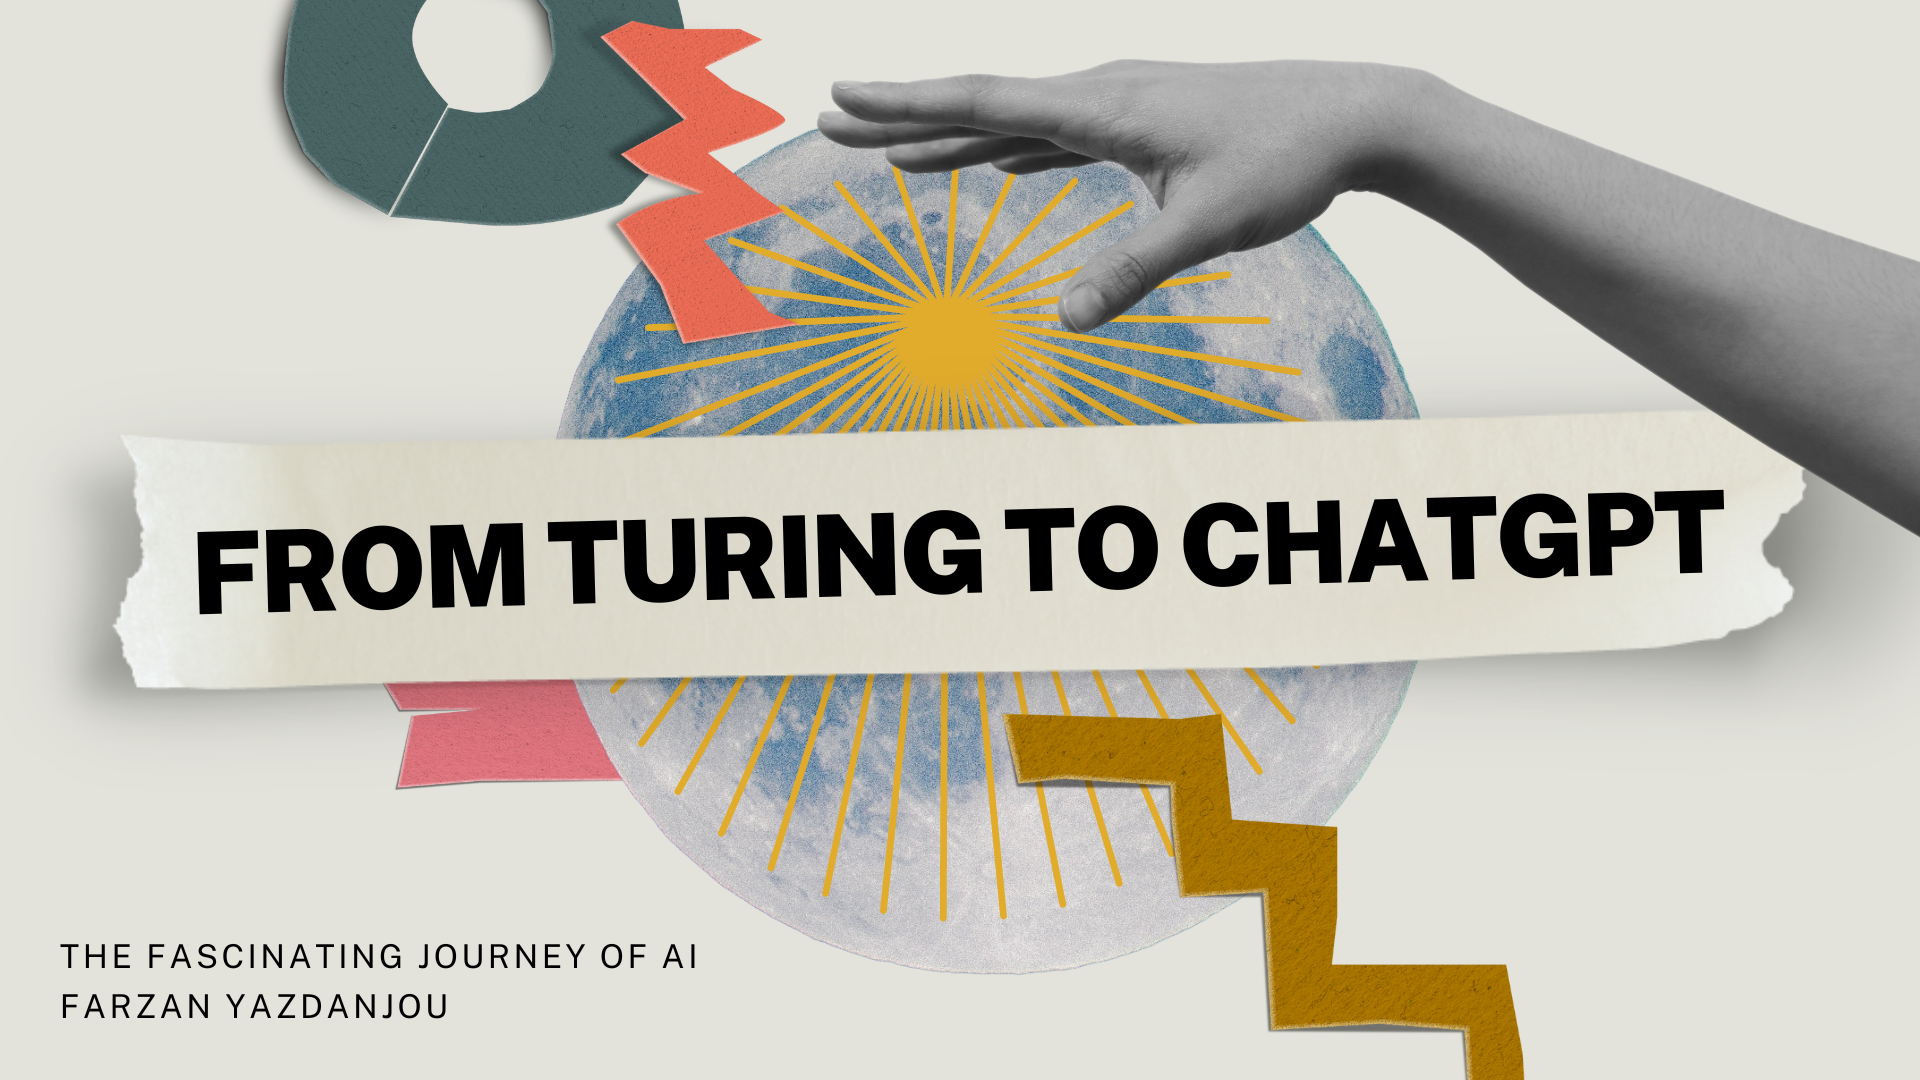 The Fascinating Journey of AI: From Turing to ChatGPT - Farzan Yazdanjou